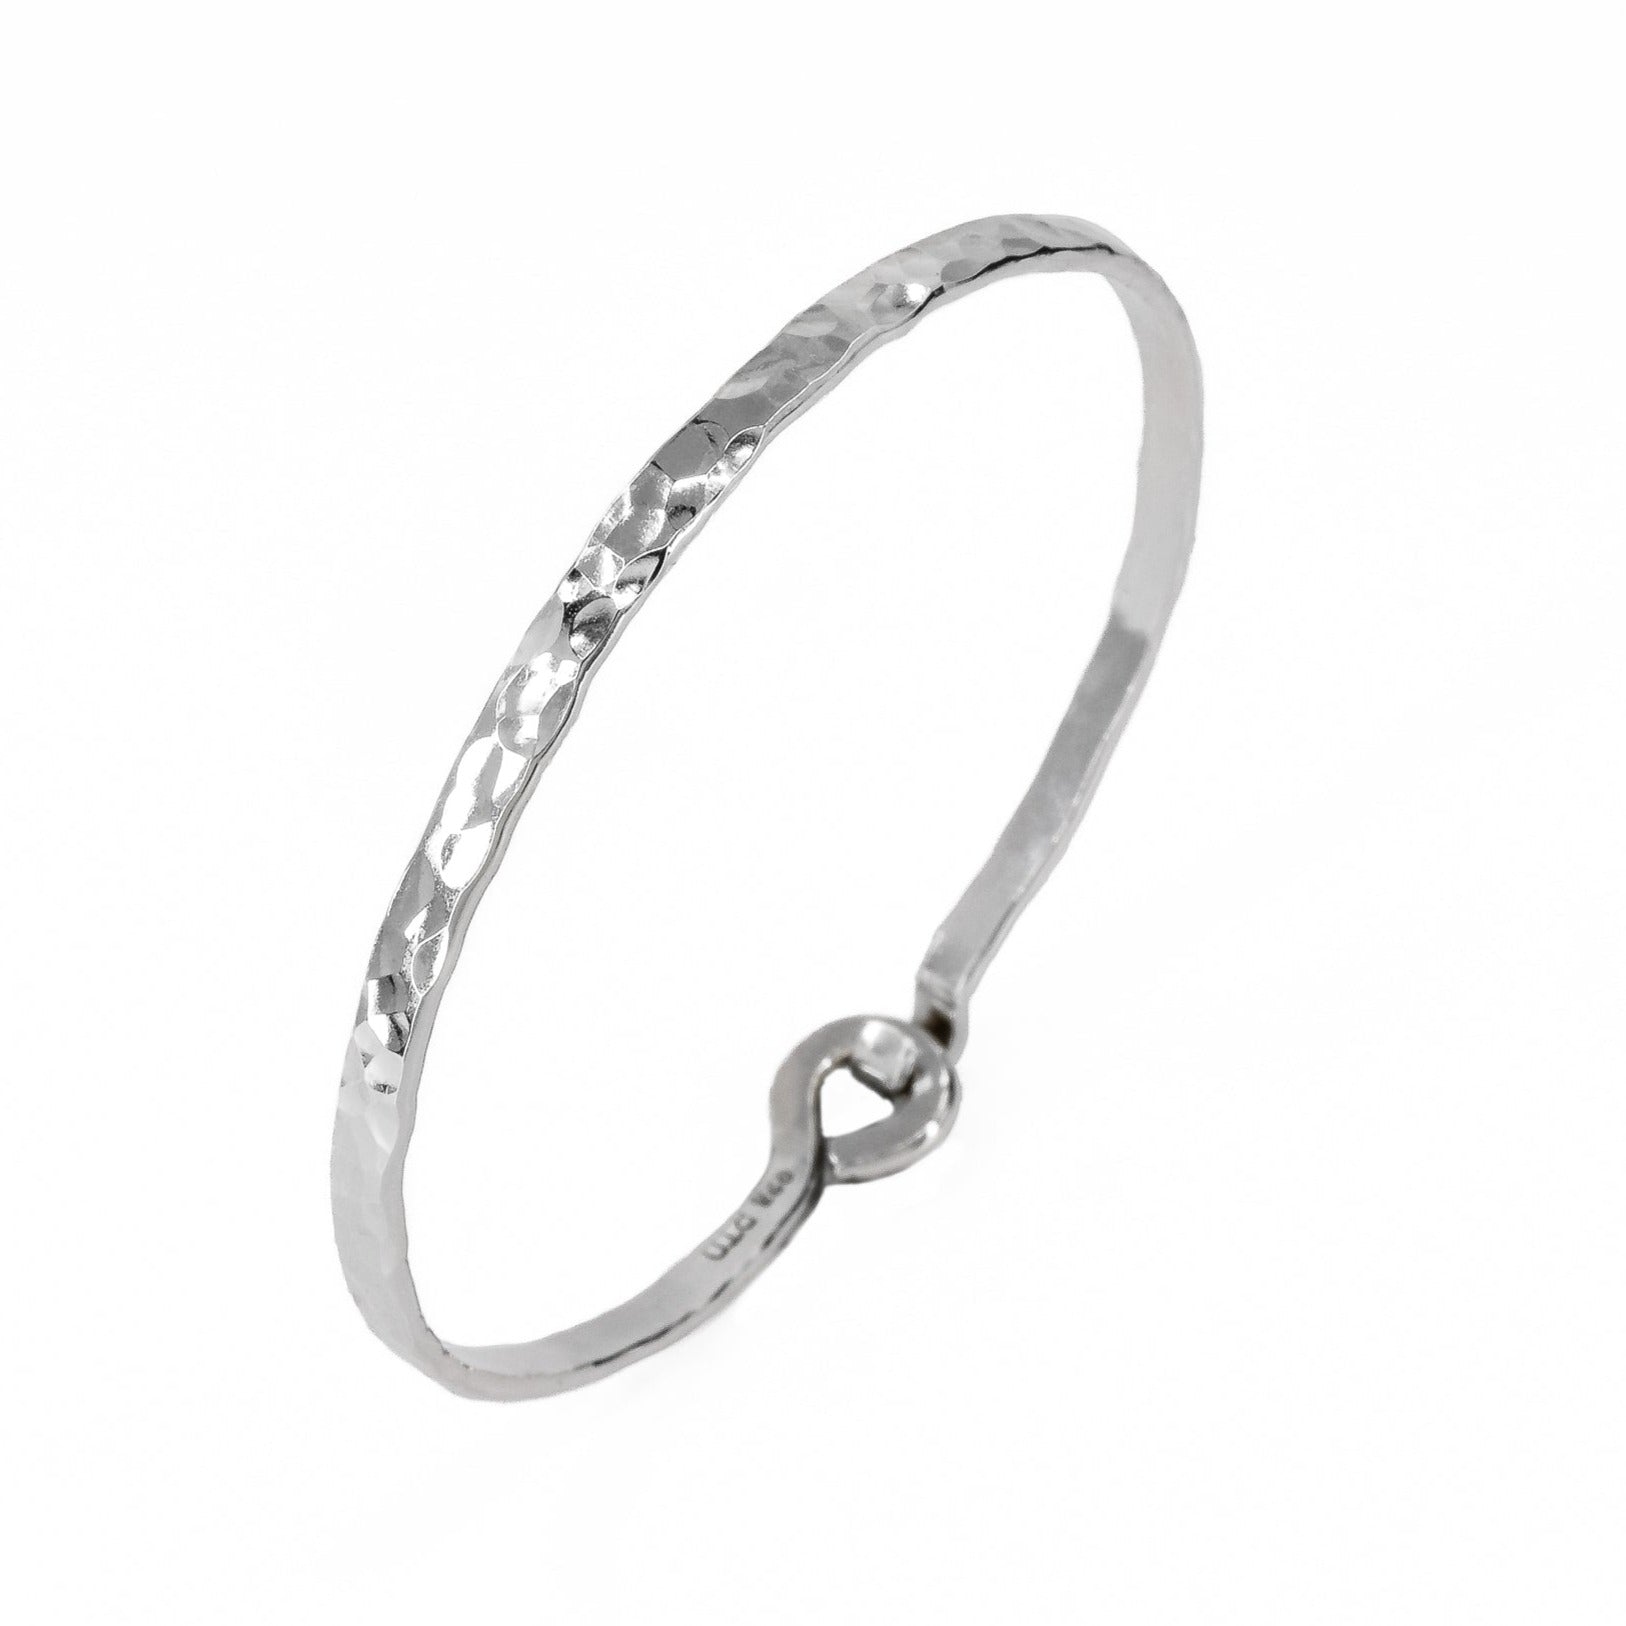 Heavy weight hammered sterling silver bangle bracelet